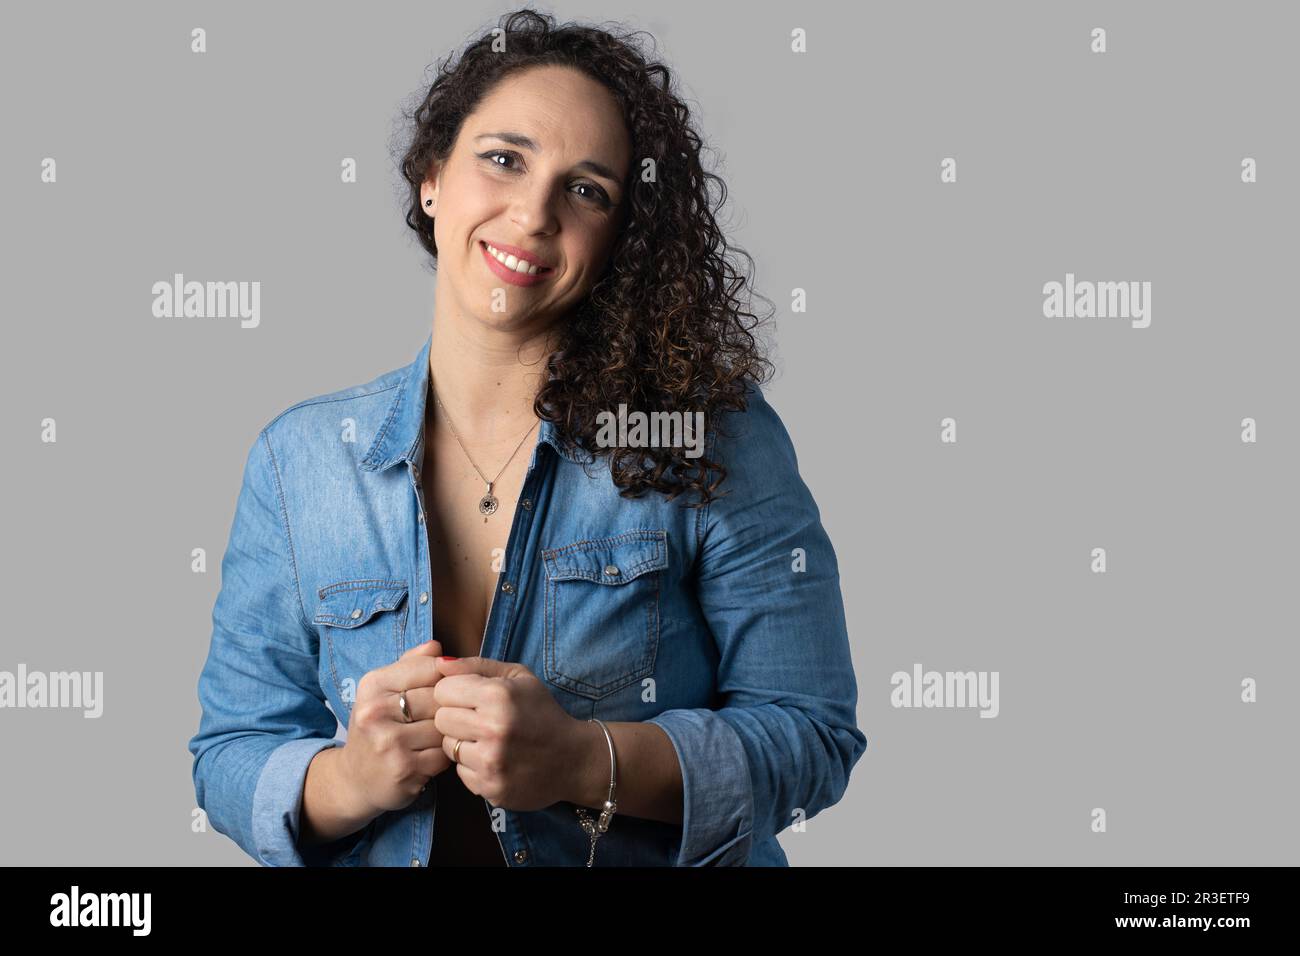 Young woman with curly black hair wearing blue denim shirt and hands grasping shirt Stock Photo